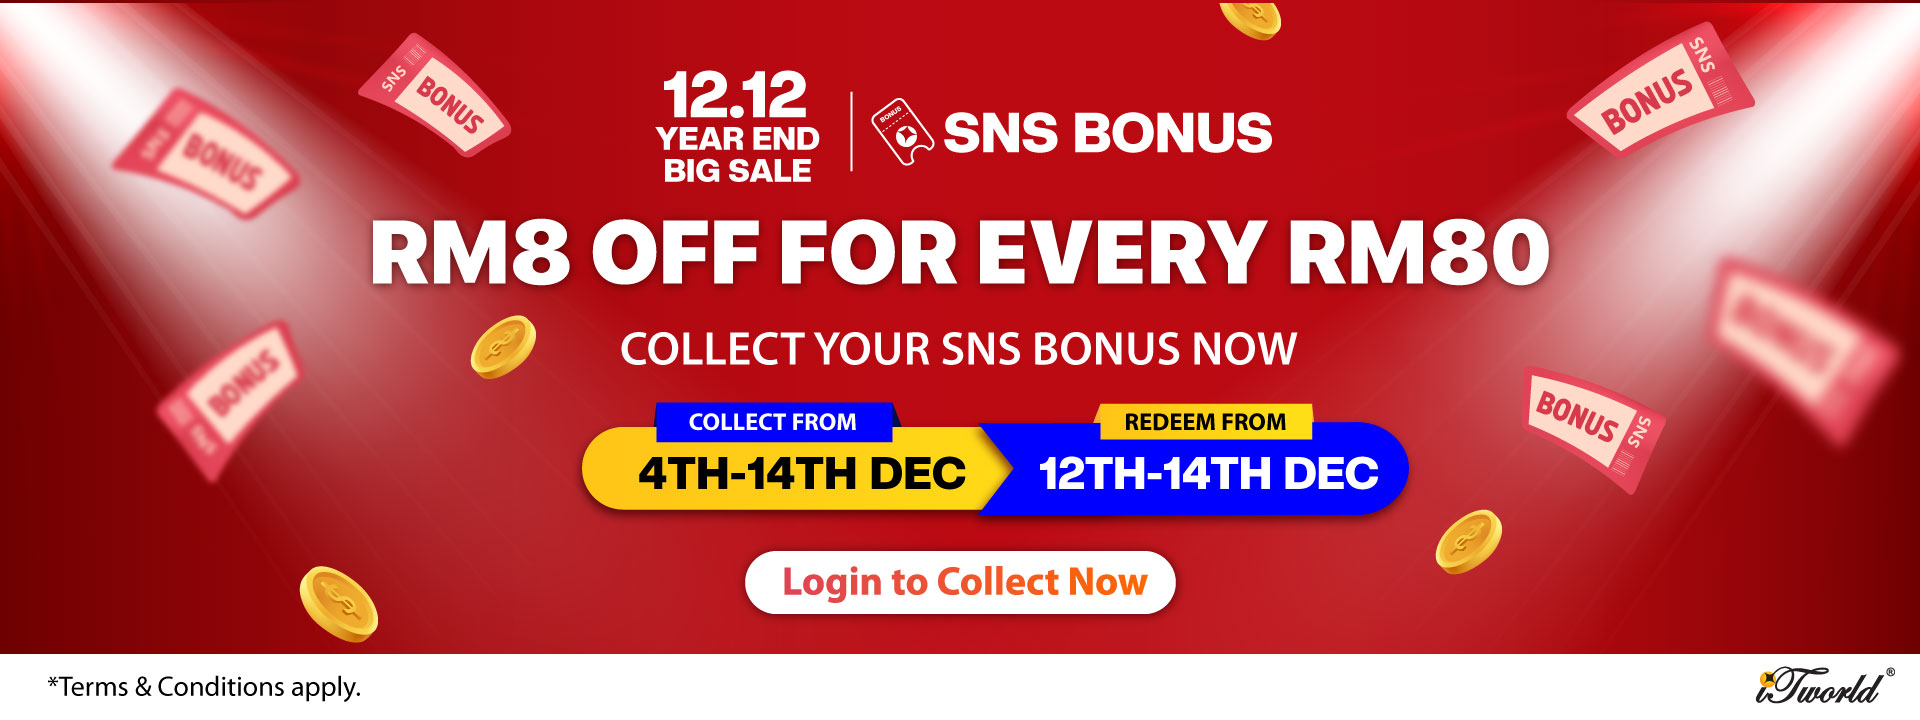 Collect SNS Bonus and save more on 12.12 Year End Big Sale